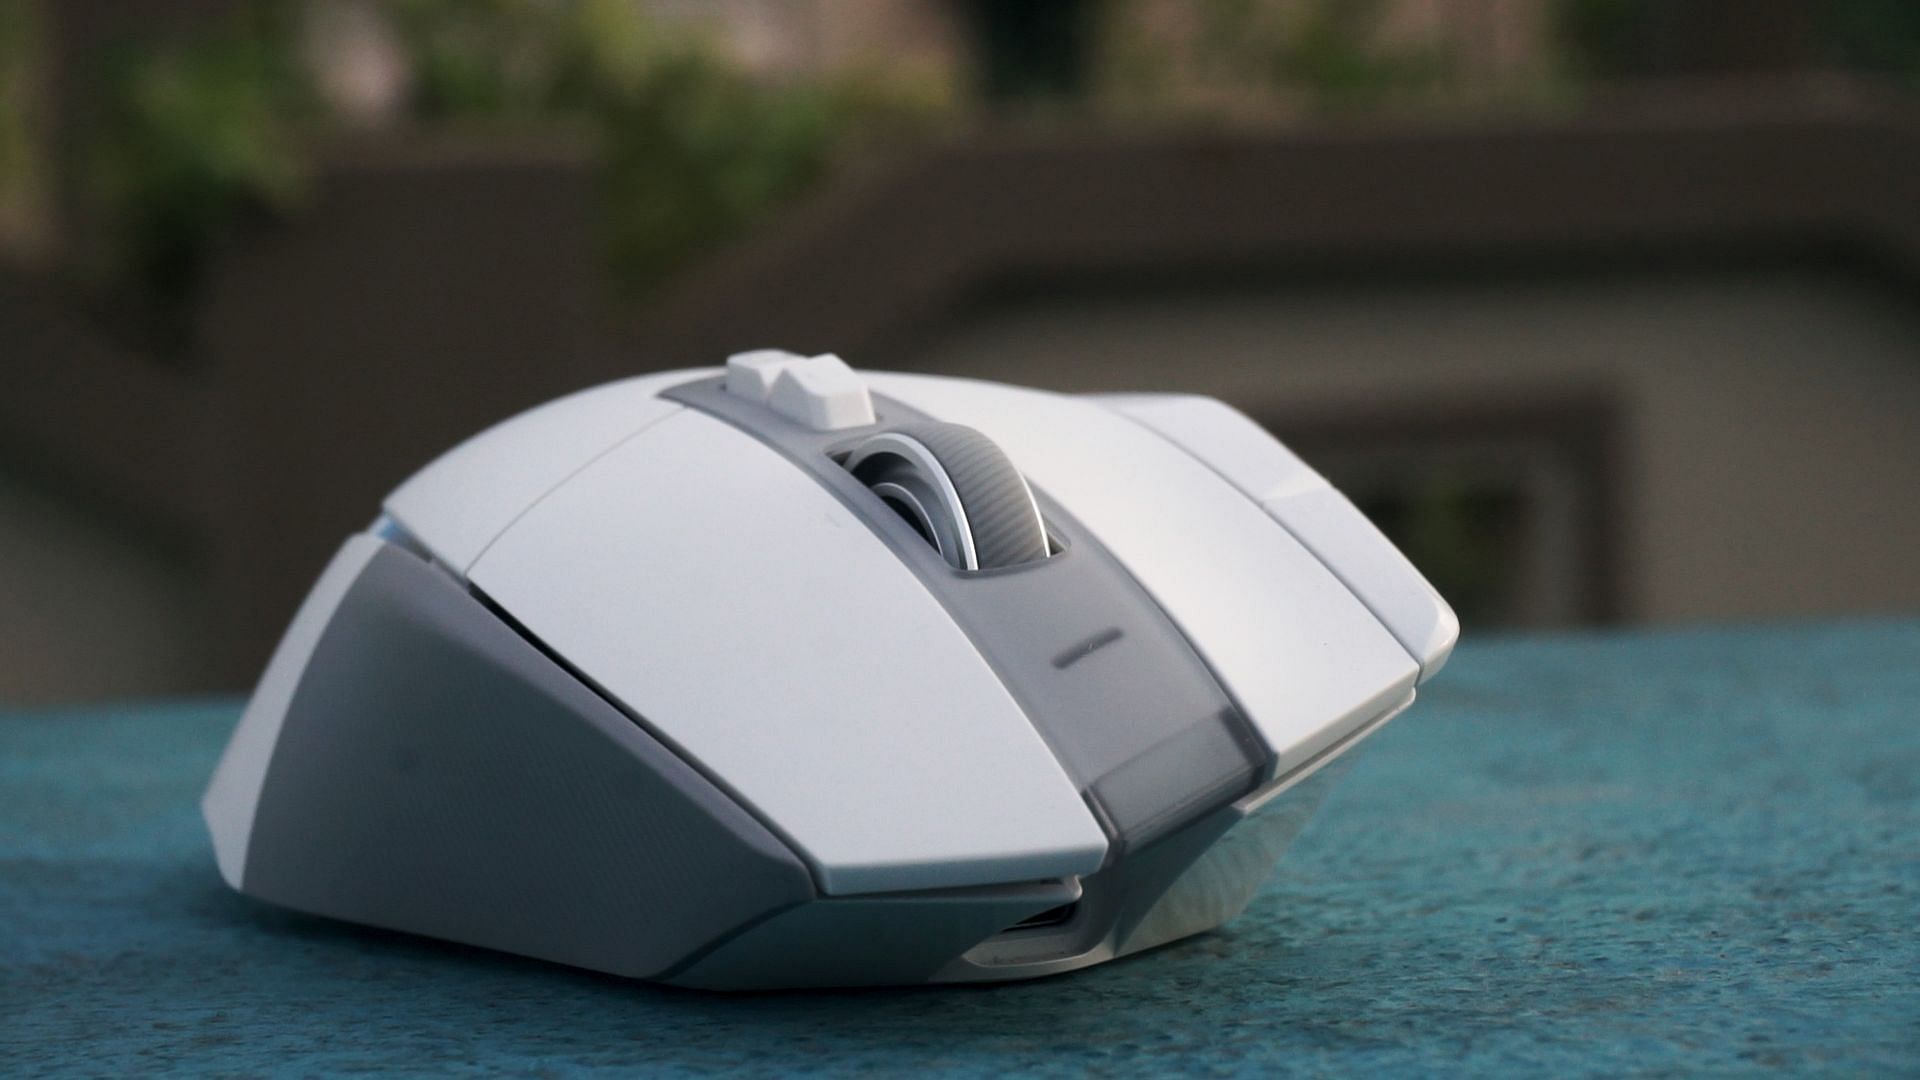 Logitech Upgrades Its Greatest Gaming Mouse in the G502 X - Tech Advisor